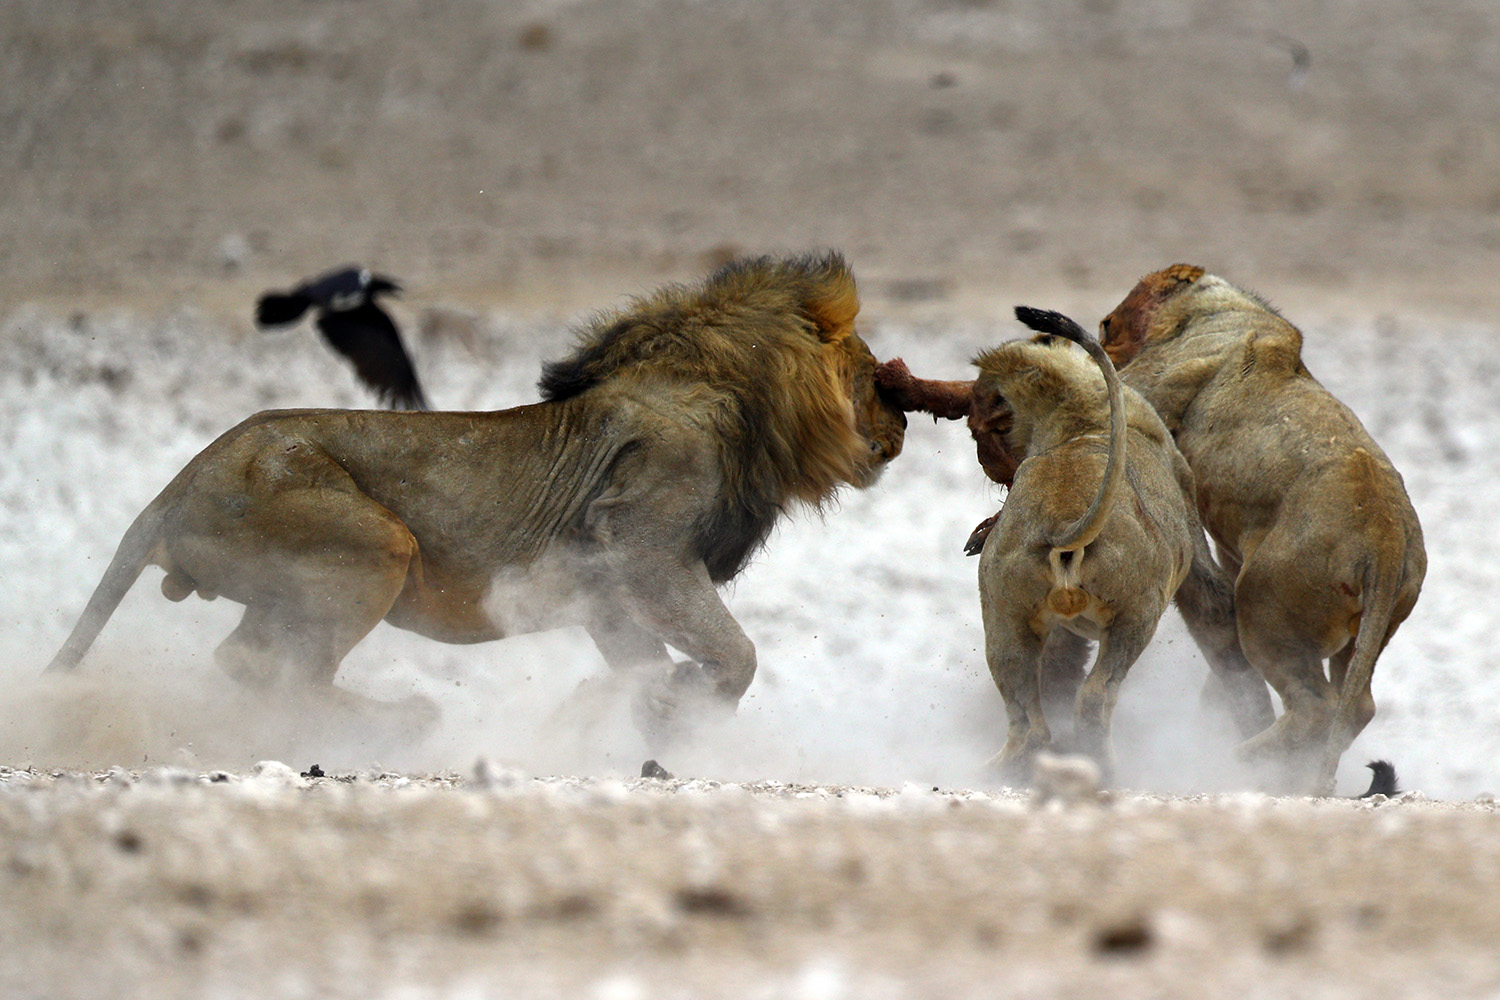 Three male lions fight over the remains of a springbok after a kill at the Nebrowni waterhole, Etosha National Park in Namibia. The male on right came away with prized antelope dinner only to lose the next battle. (Photo: Gordon Donovan)